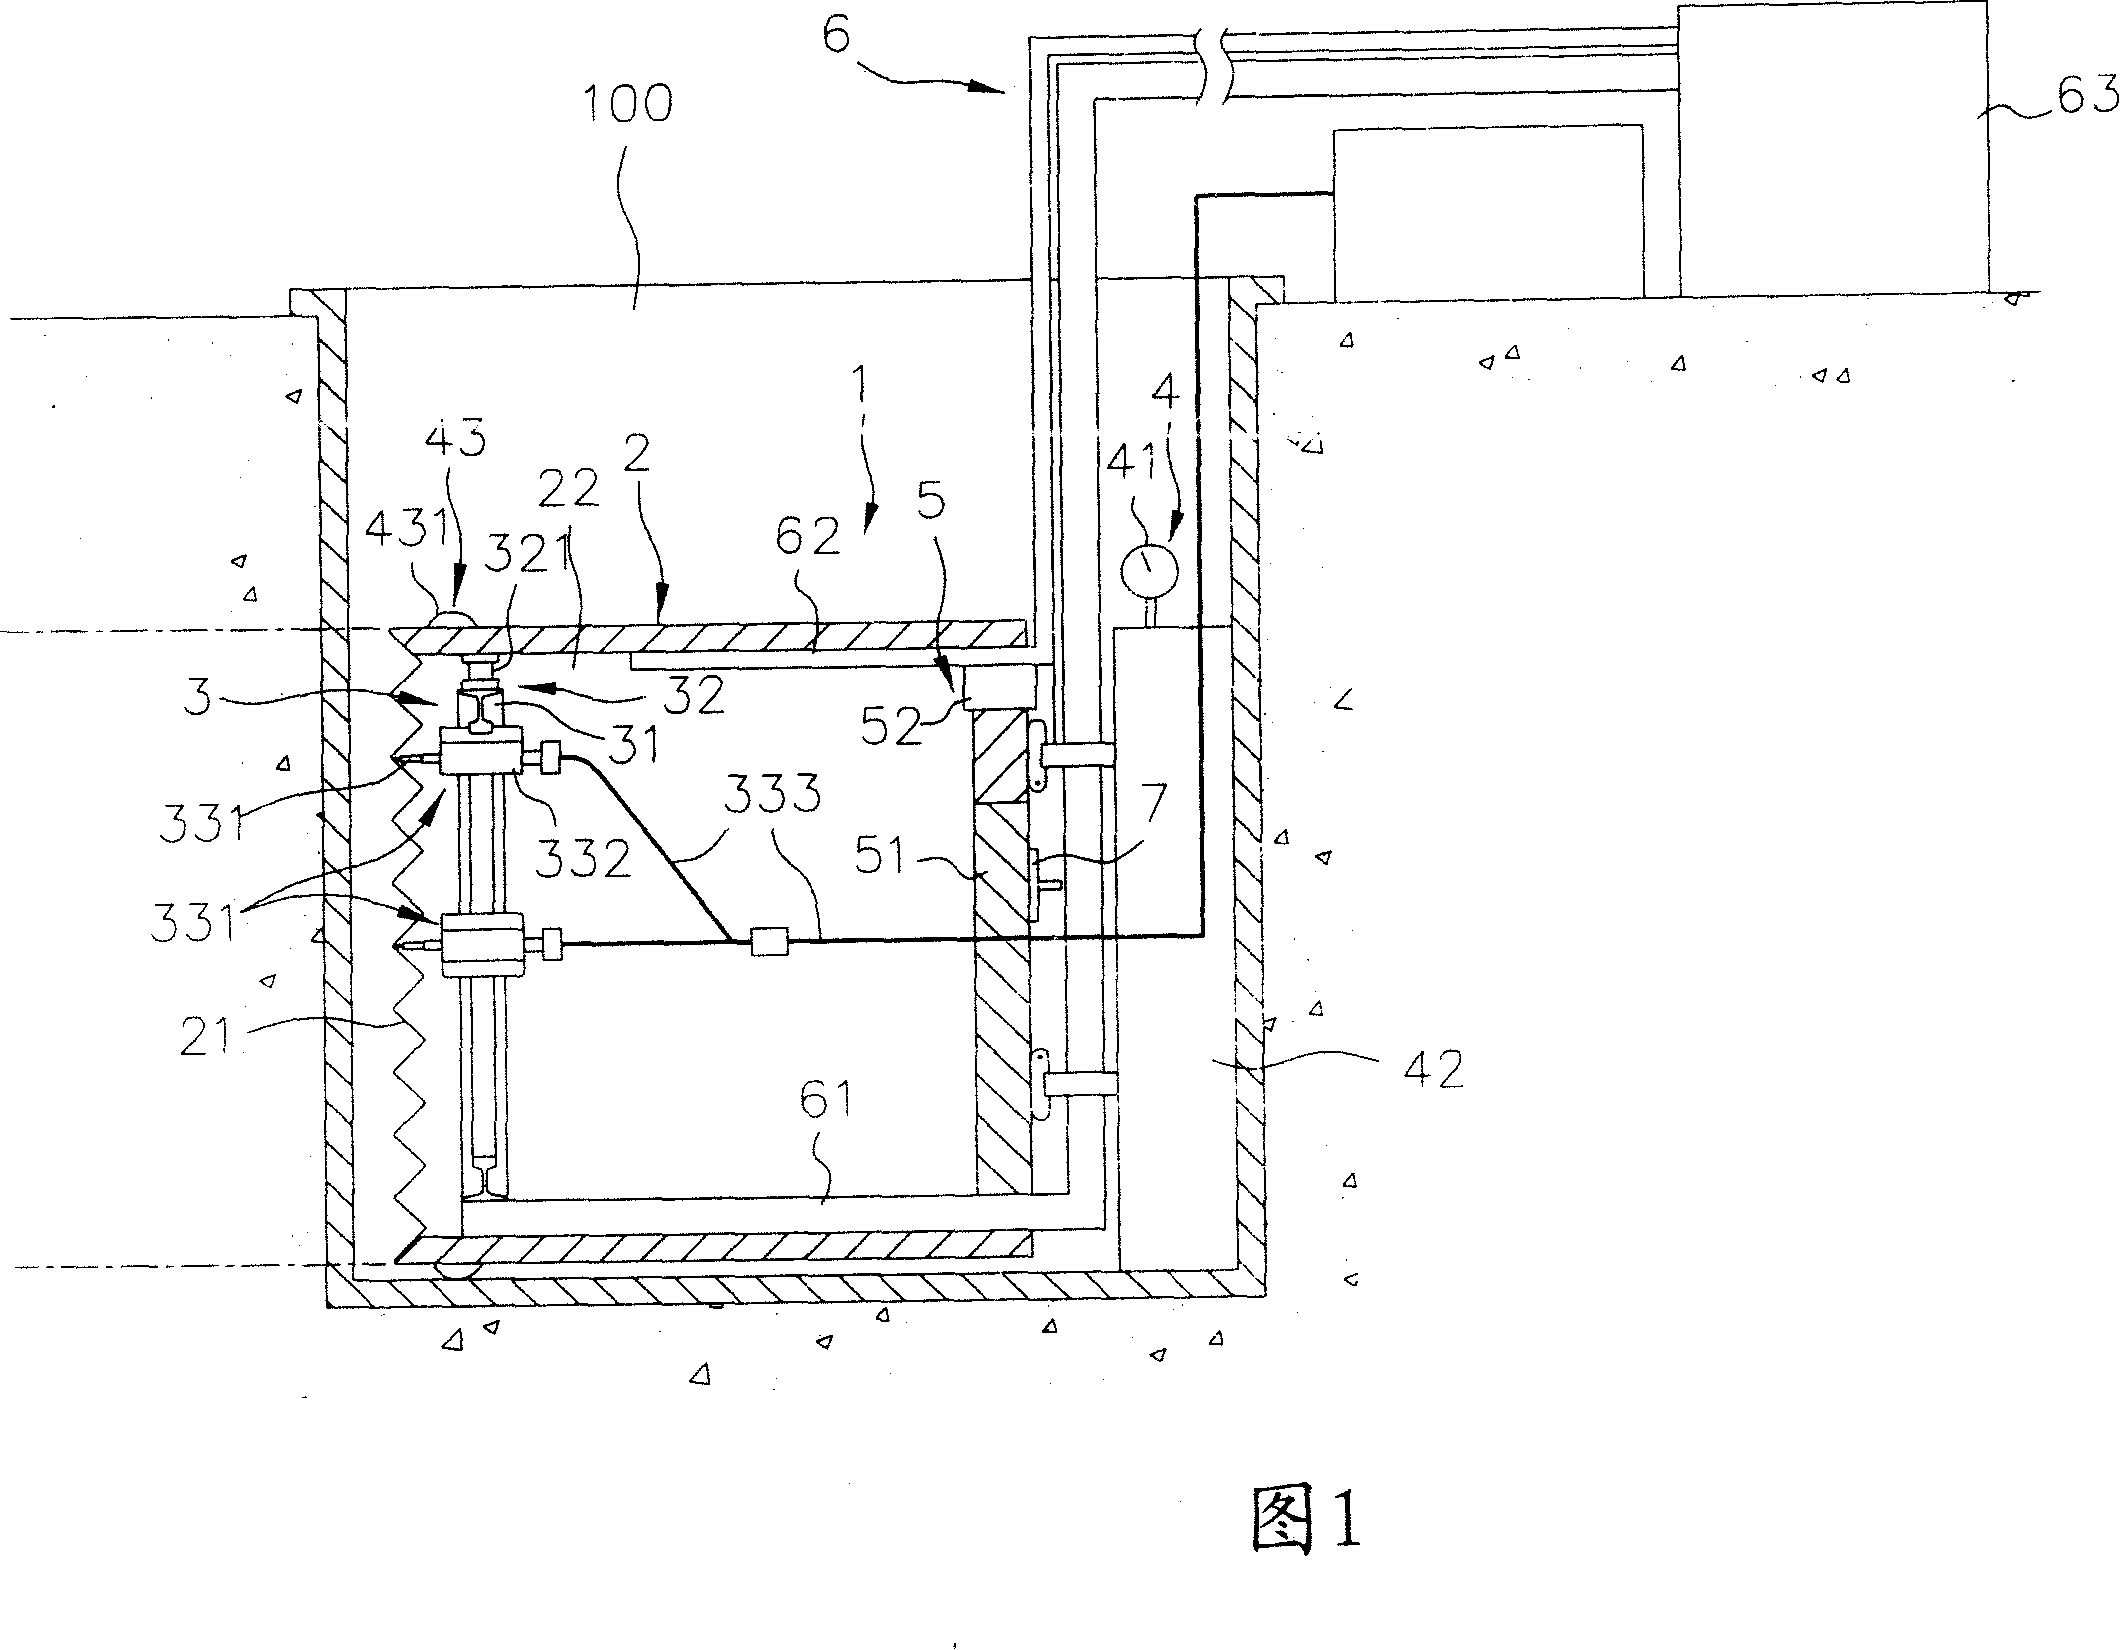 Non-contact type destruction propeller device for cementing domain